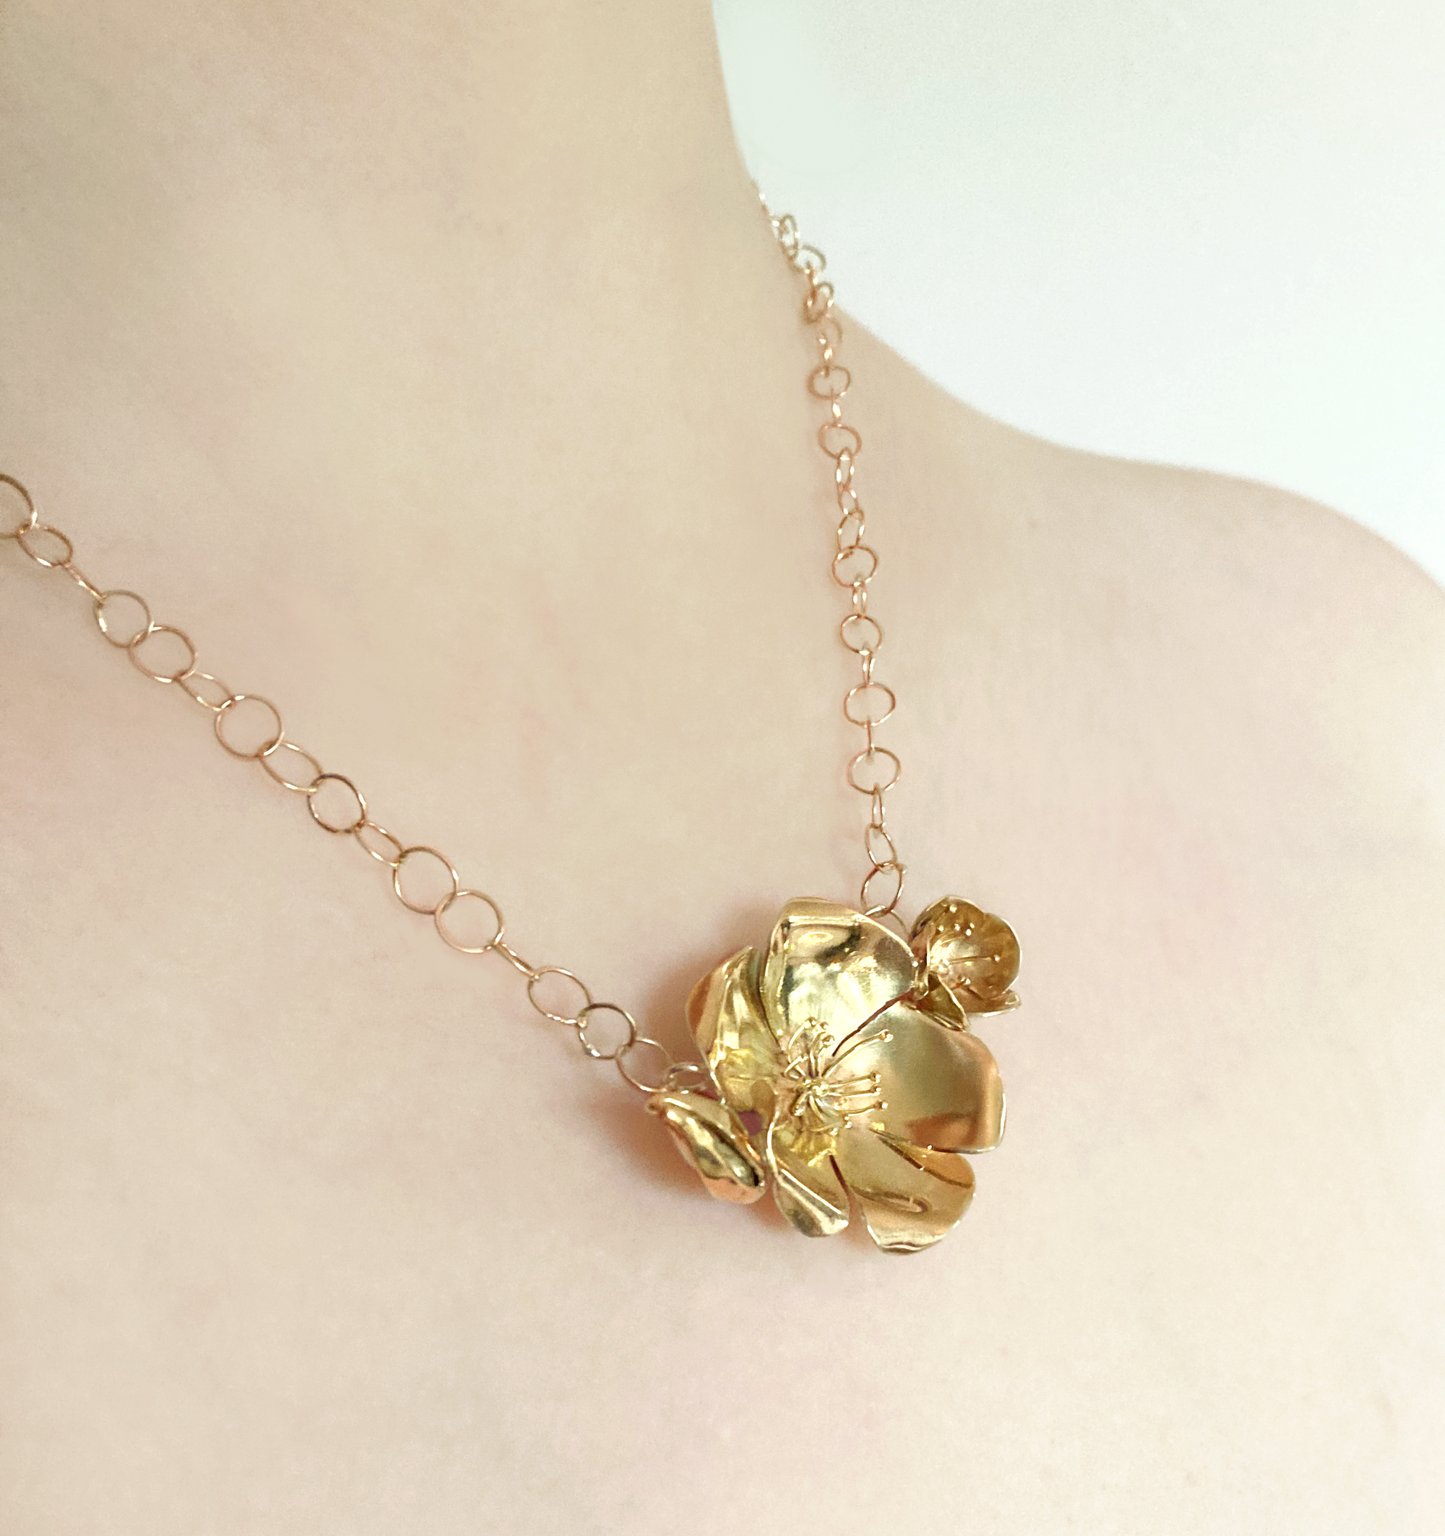 woman's neck wearing statement gold rose necklace and large link chain